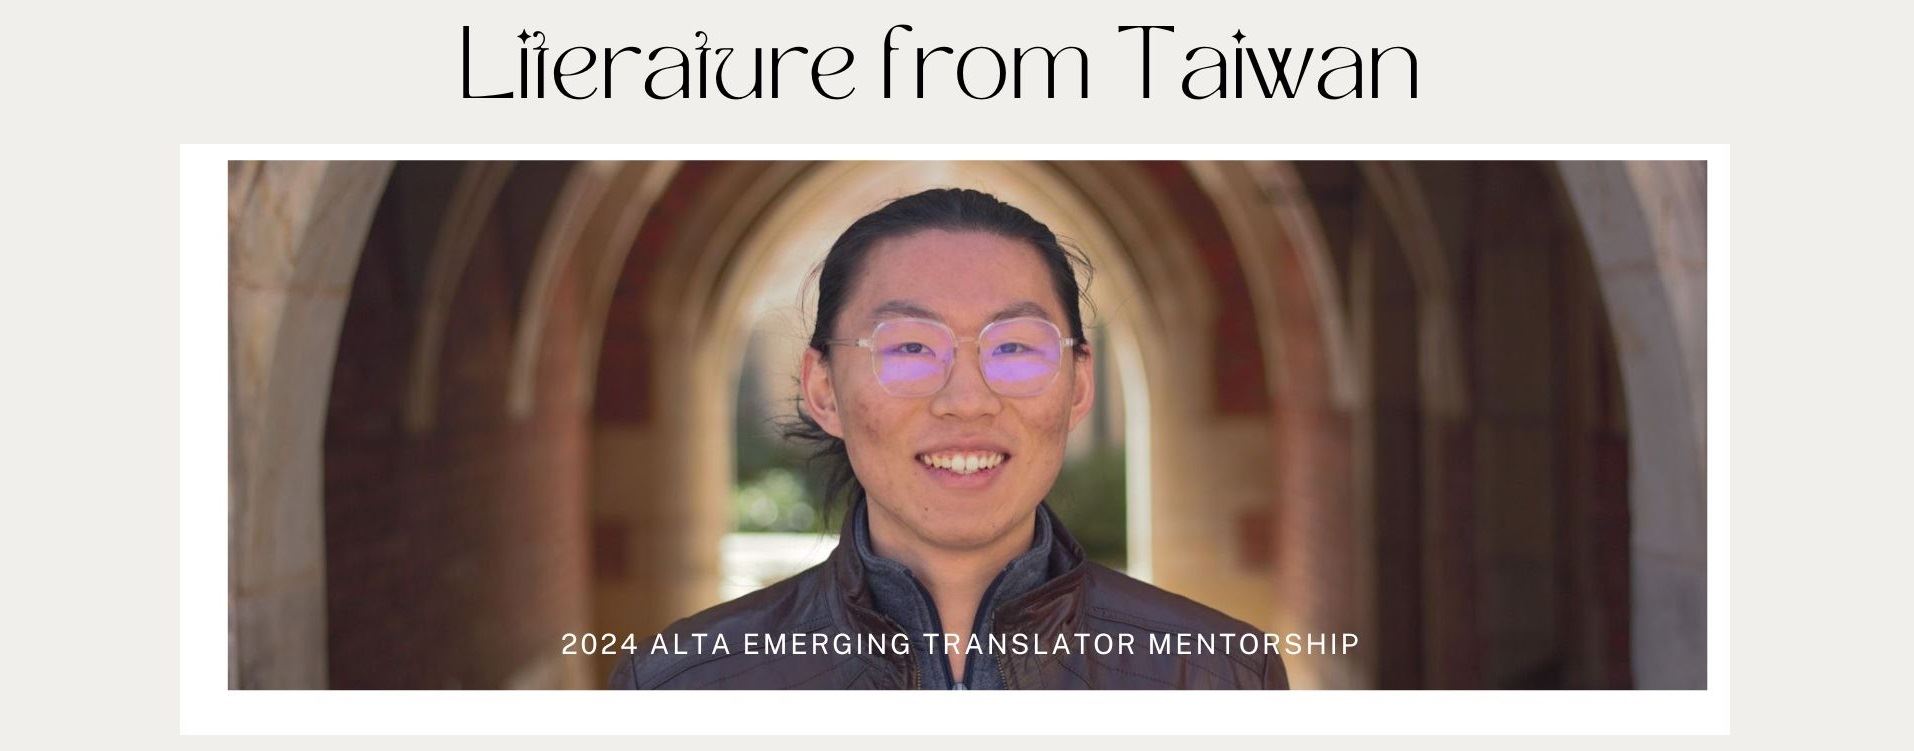 Northwest Rain by Taiwanese Writer Tong Wei-Ger Selected for the 2024 ALTA Emerging Translator Mentorship: Literature from Taiwan